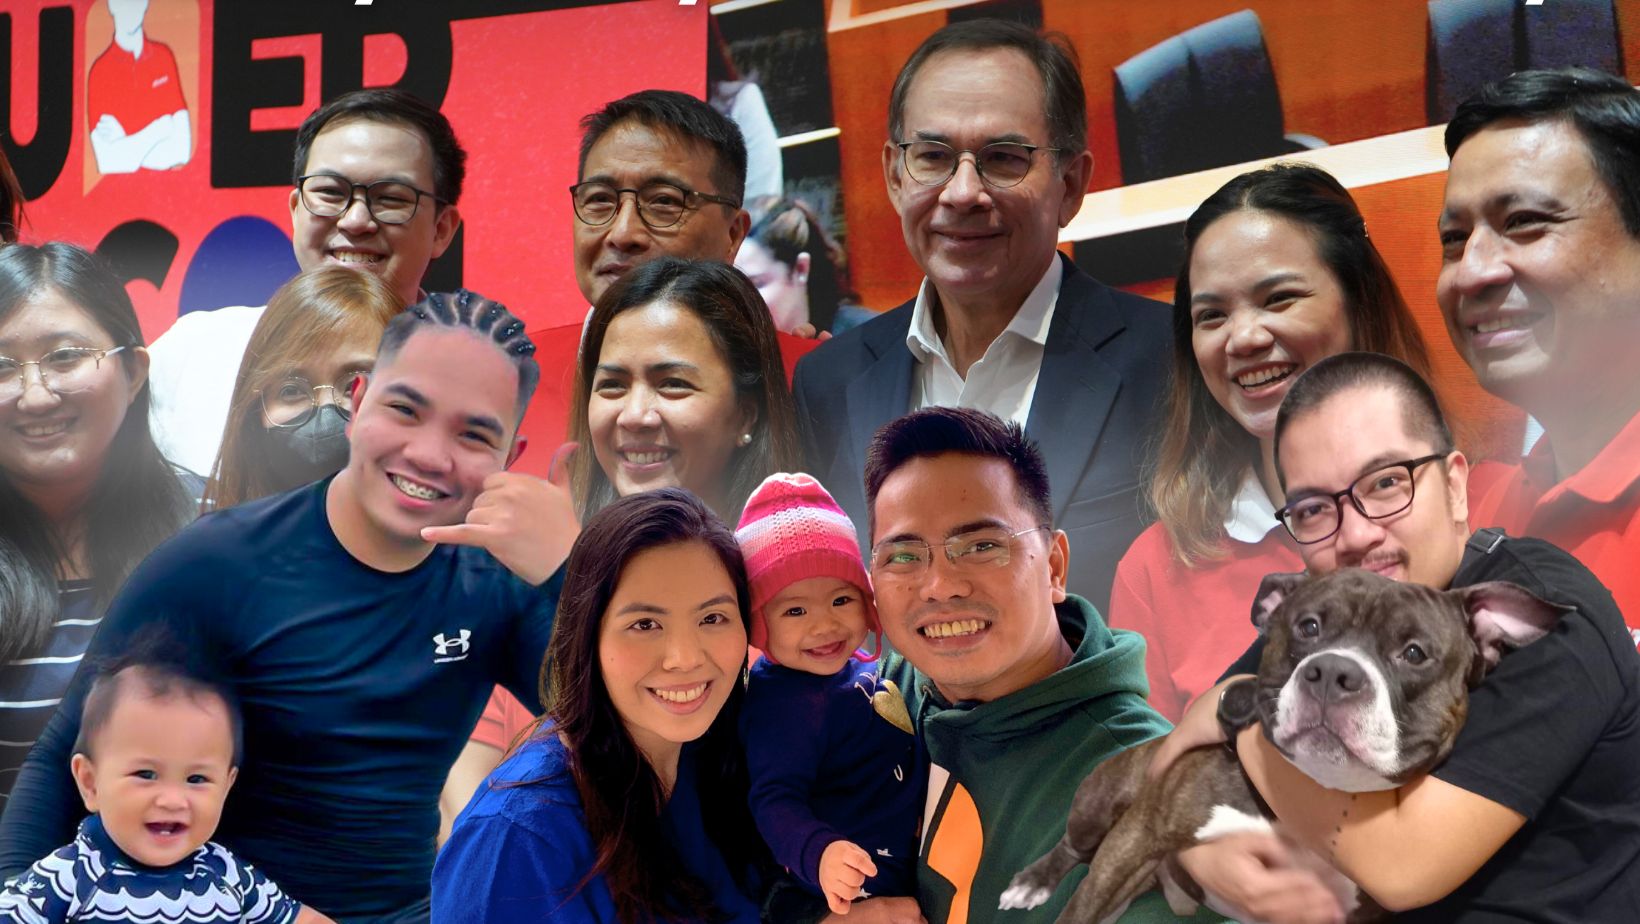 Aboitiz Group Celebrates the unique journey of every Dad this Father’s Day